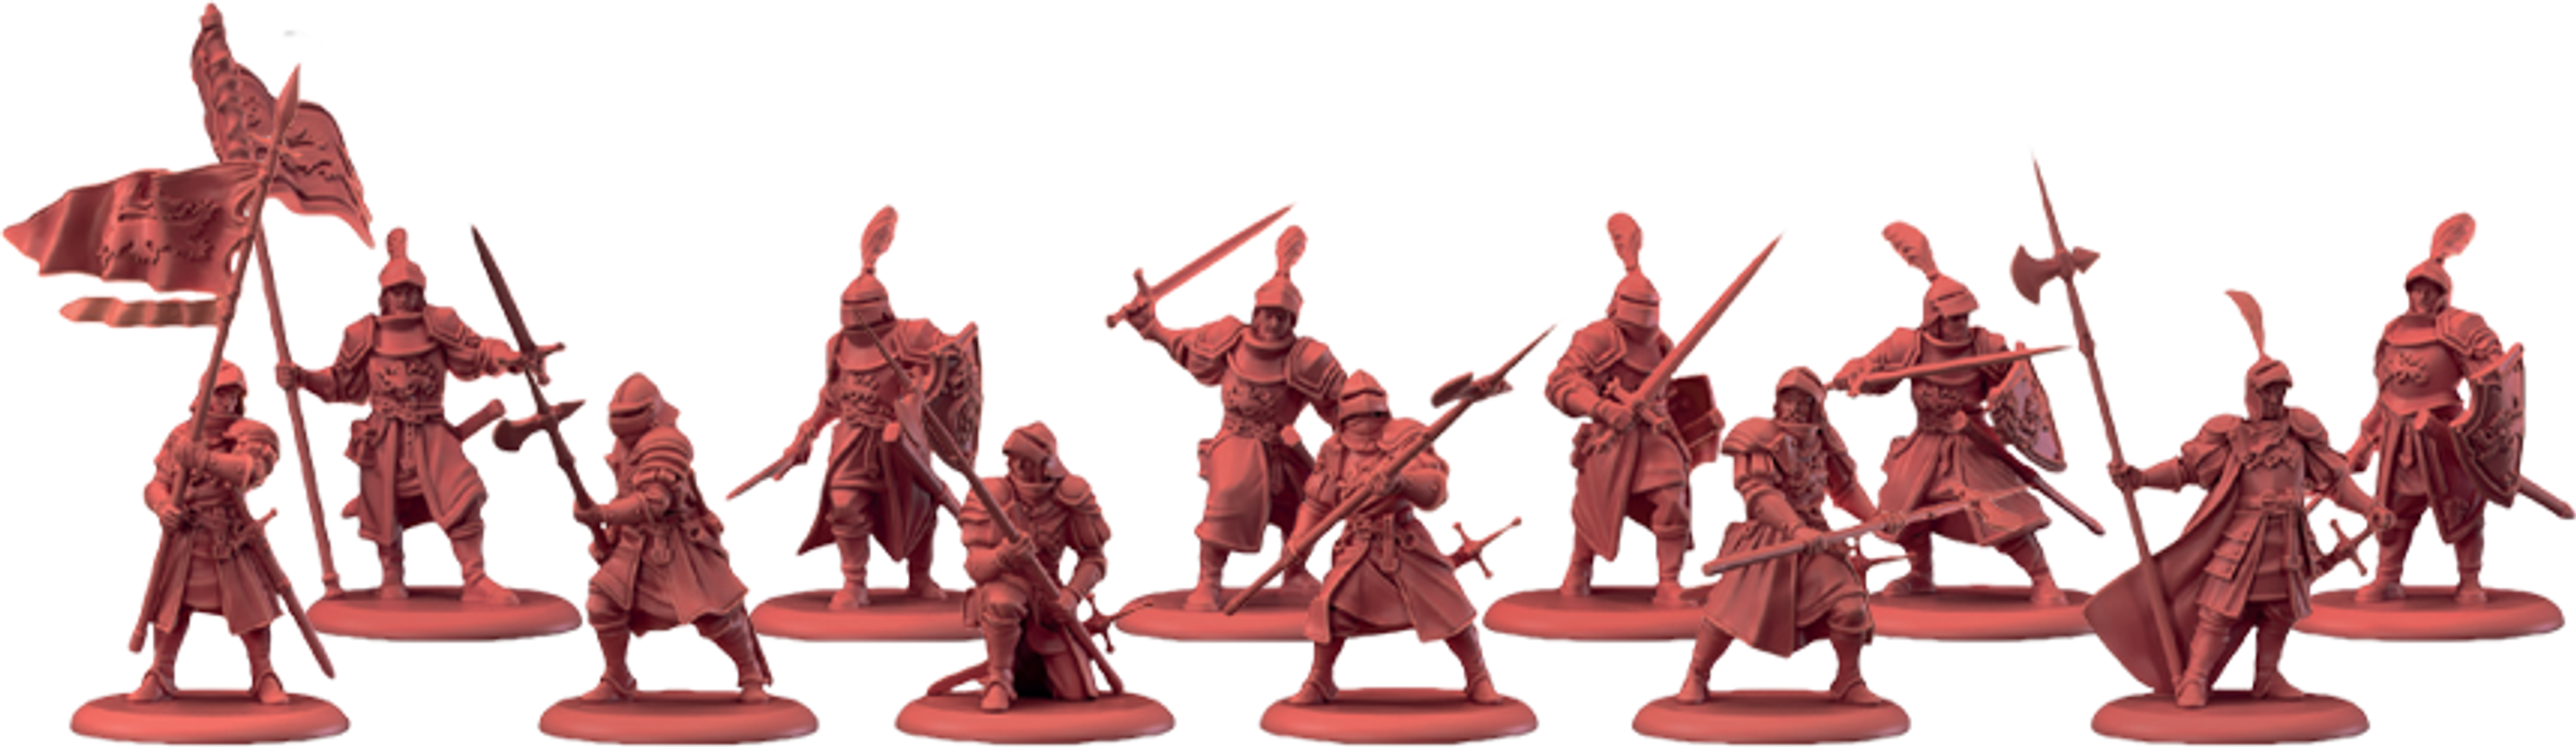 A Song of Ice & Fire: Tabletop Miniatures Game – Lannister Starter Set miniatures